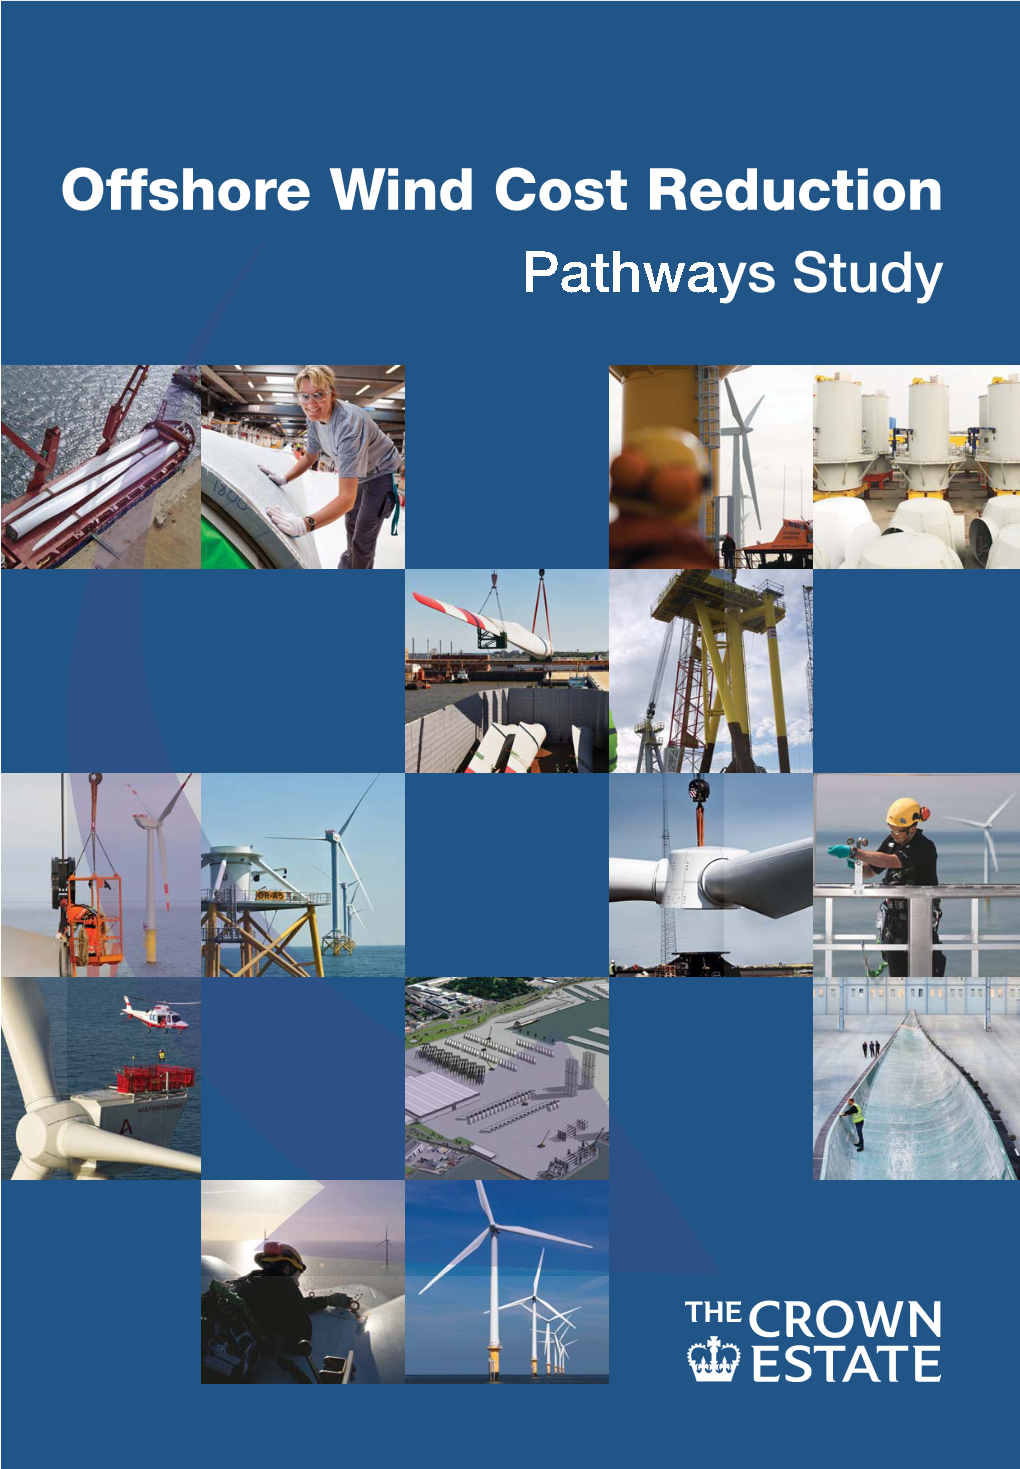 Offshore Wind Cost Reduction Pathways Study This Study Would Not Have Been Possible Without the Input, Opinion and Review of the Offshore Wind Renewable Industry